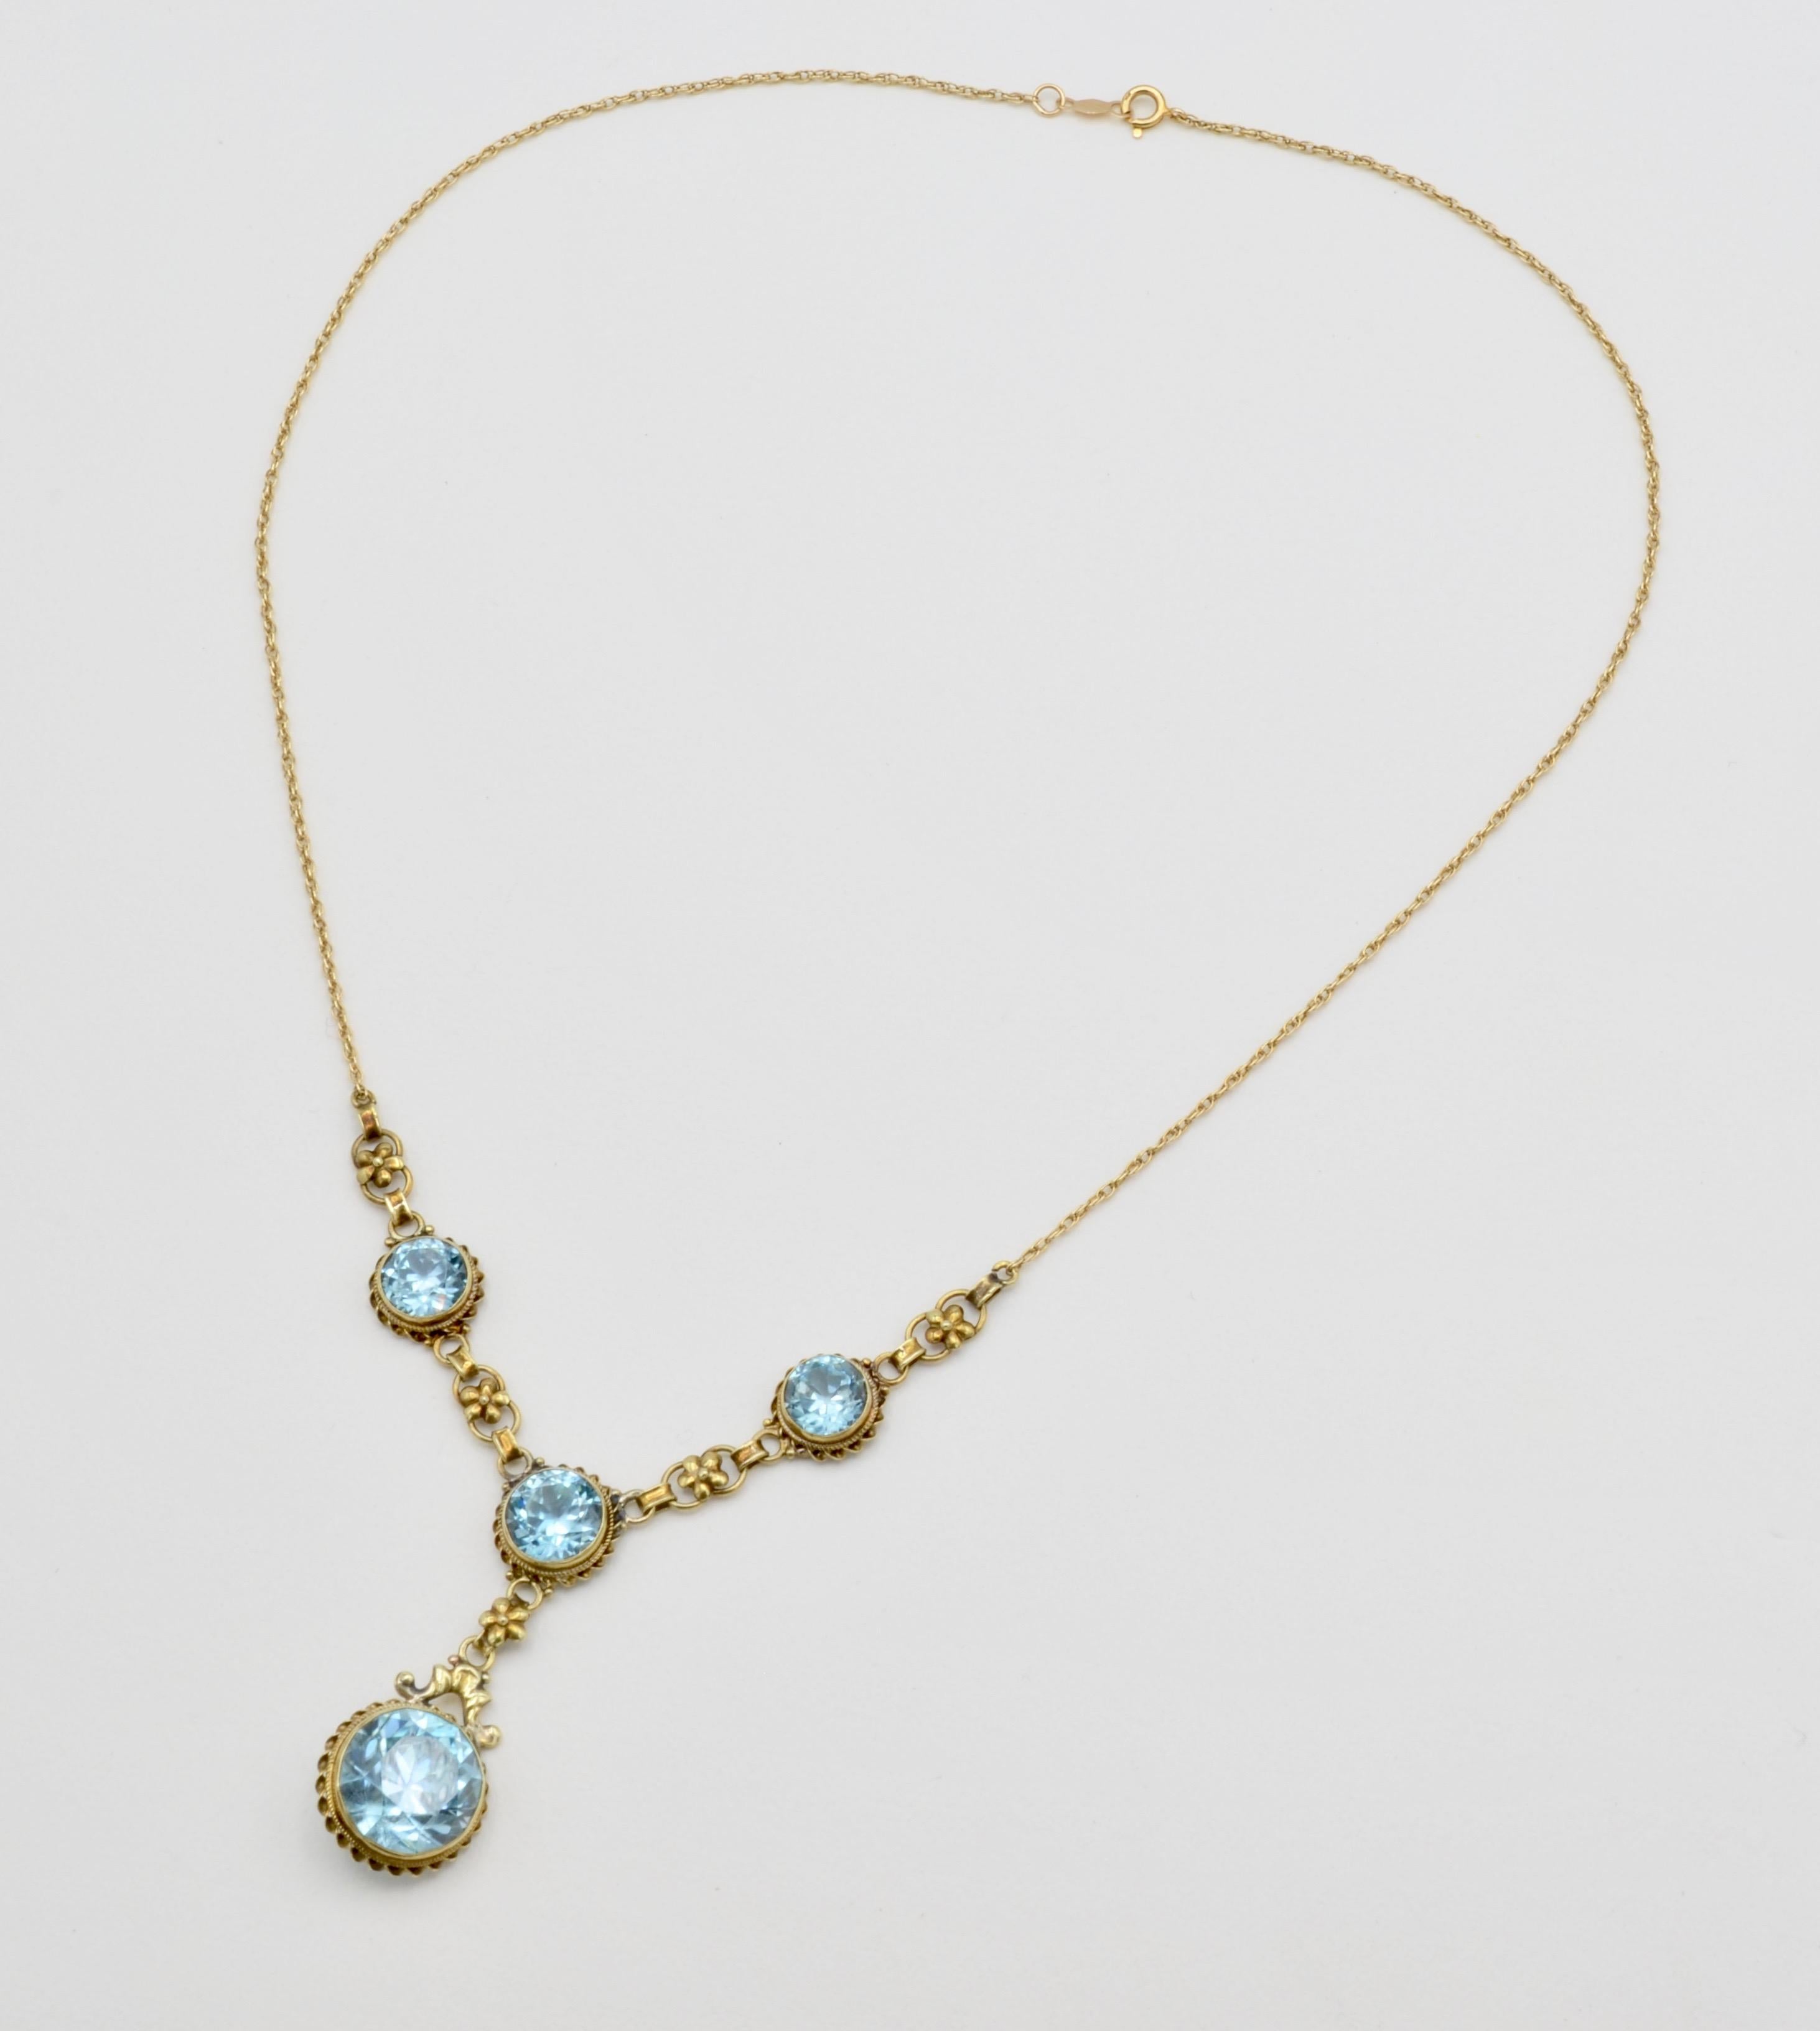 This stunning blue zircon necklace is a wonderful example of Edwardian sensibility and grace. The necklines of that period were often adorned for special occasions with this style of jewelry. Bold yet delicate. Demure yet a bit bold. The